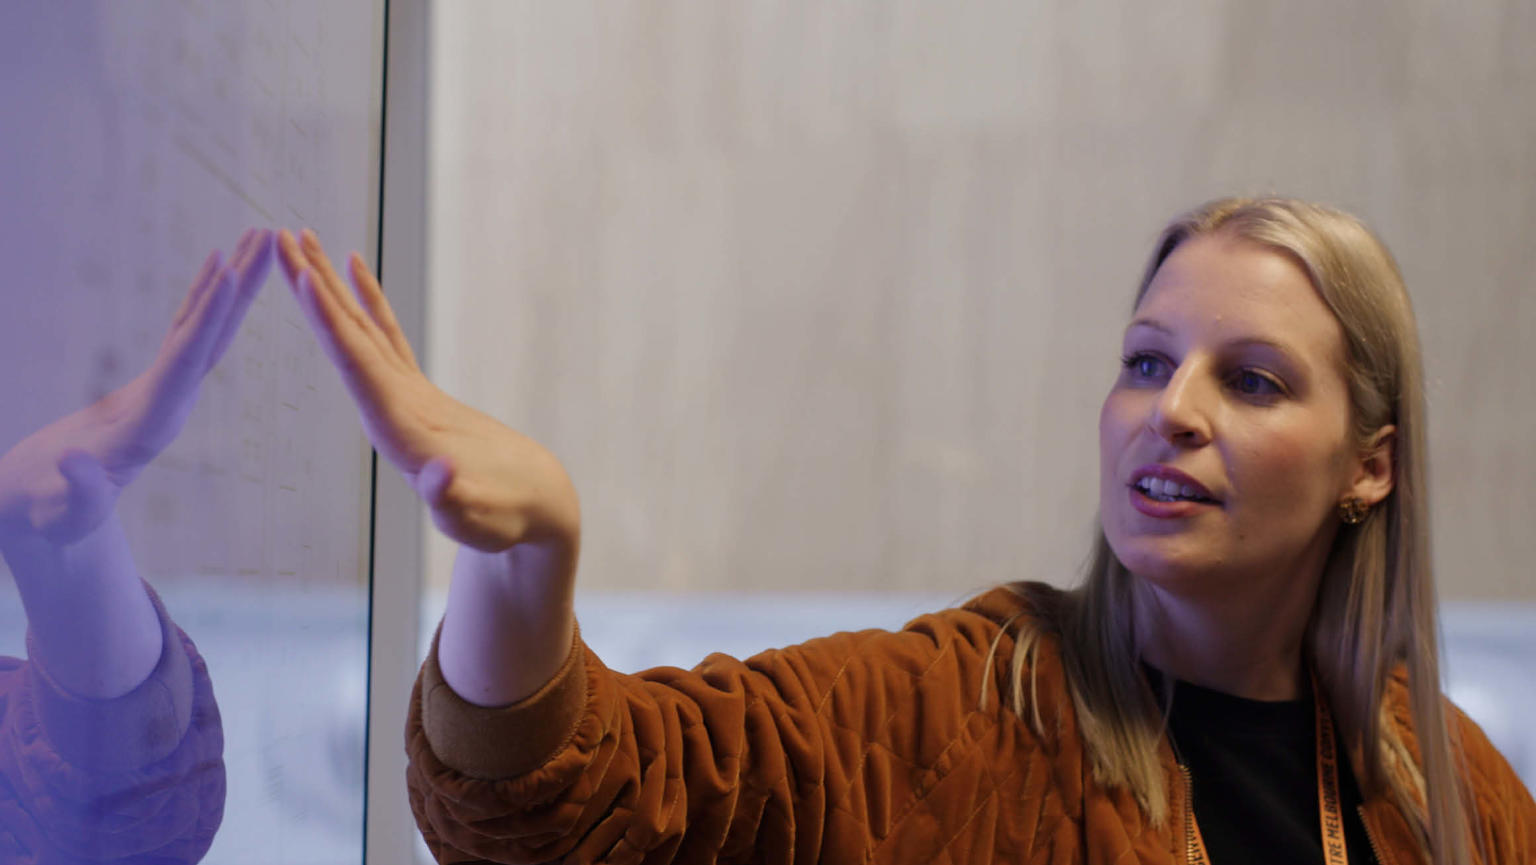 Anthea Fahey pointing at a whiteboard, engaged in a presentation to people off-camera.